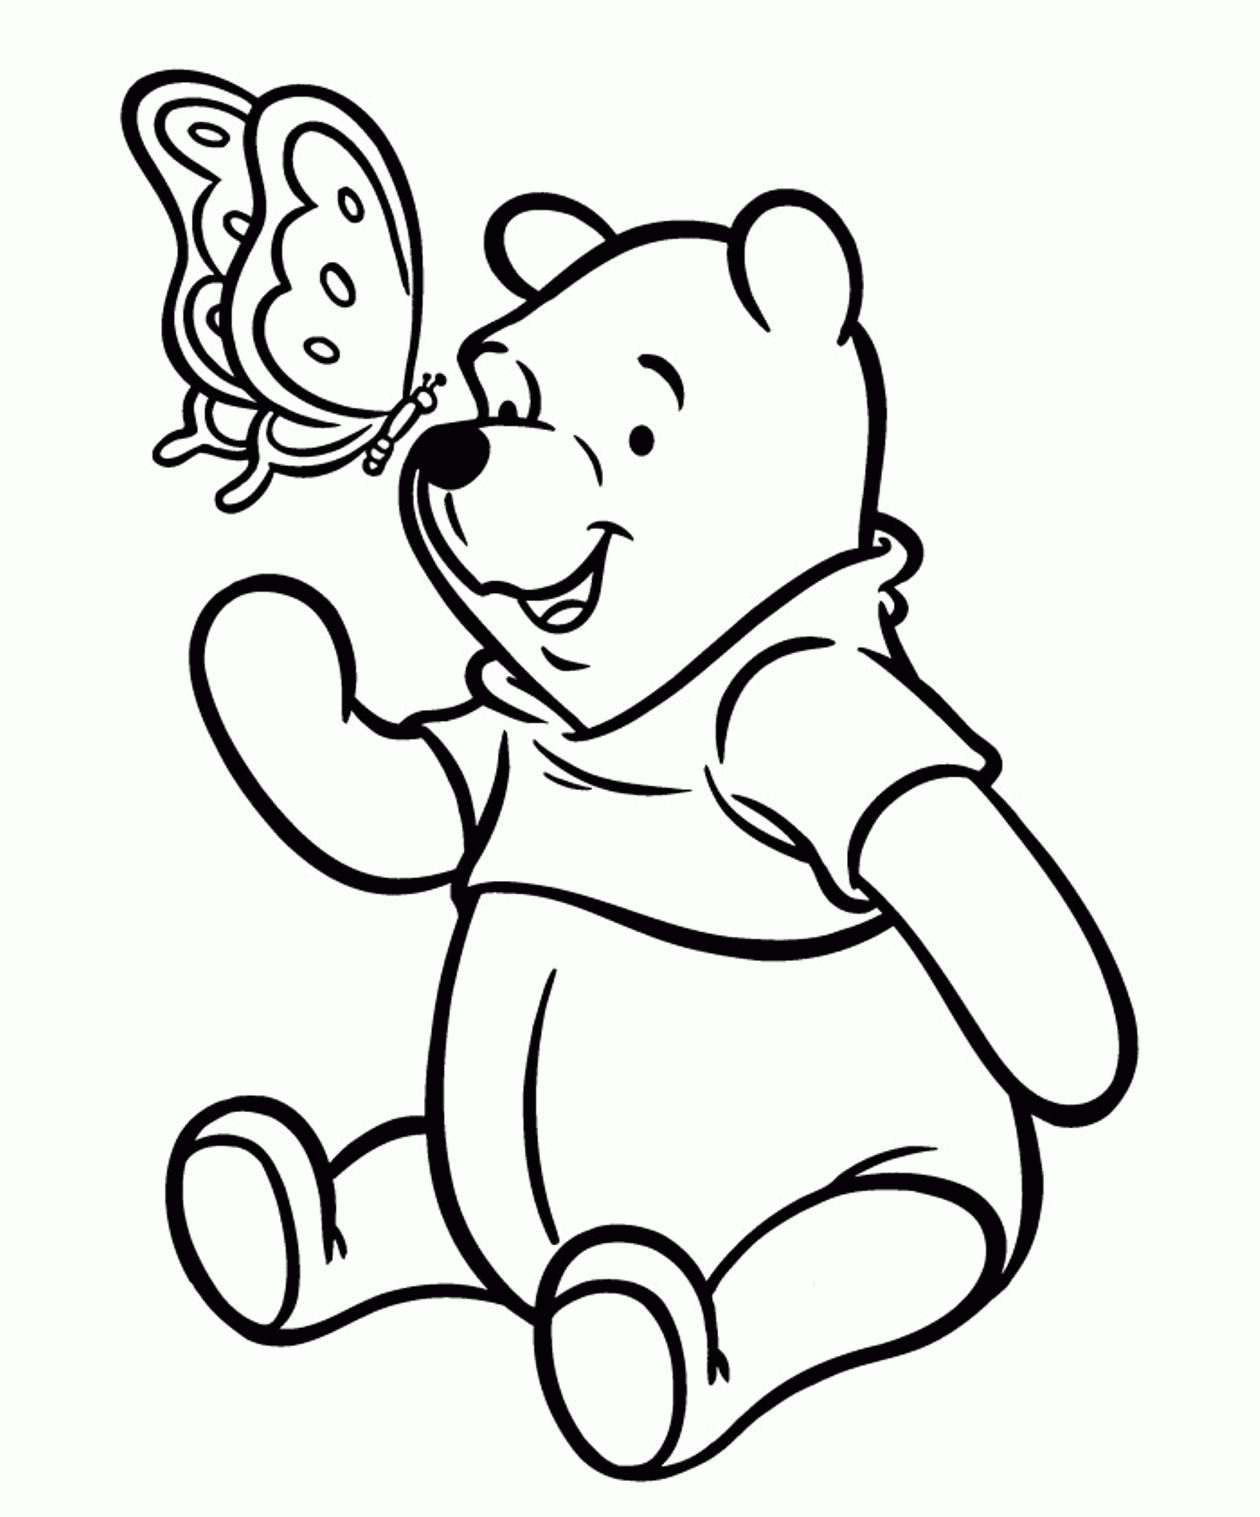 Easy Photo Pooh Drawing Coloring Pages Images - Widetheme